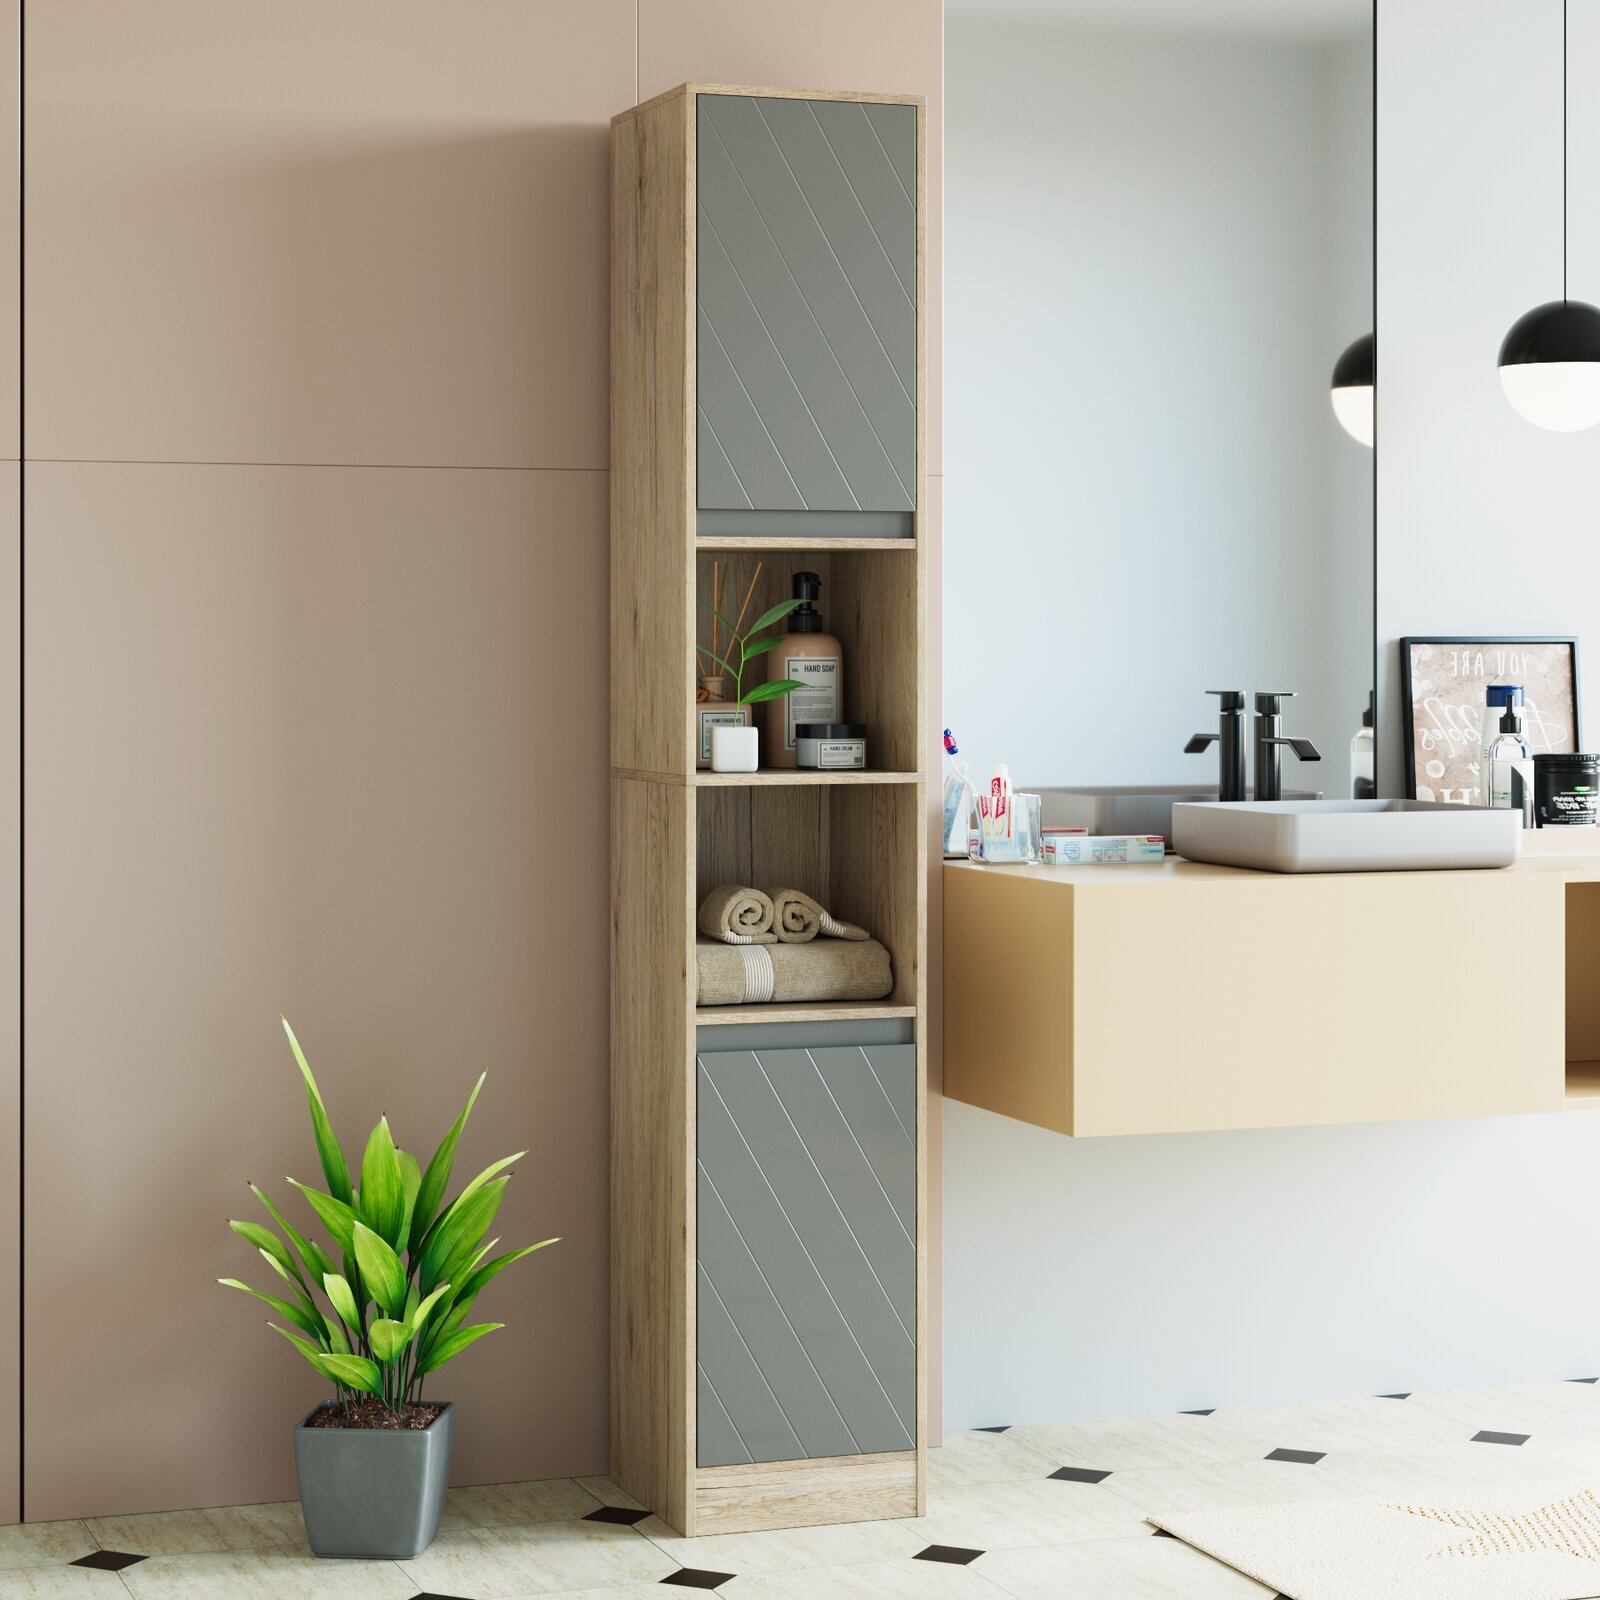 The modular tower cabinet with streamlined doors